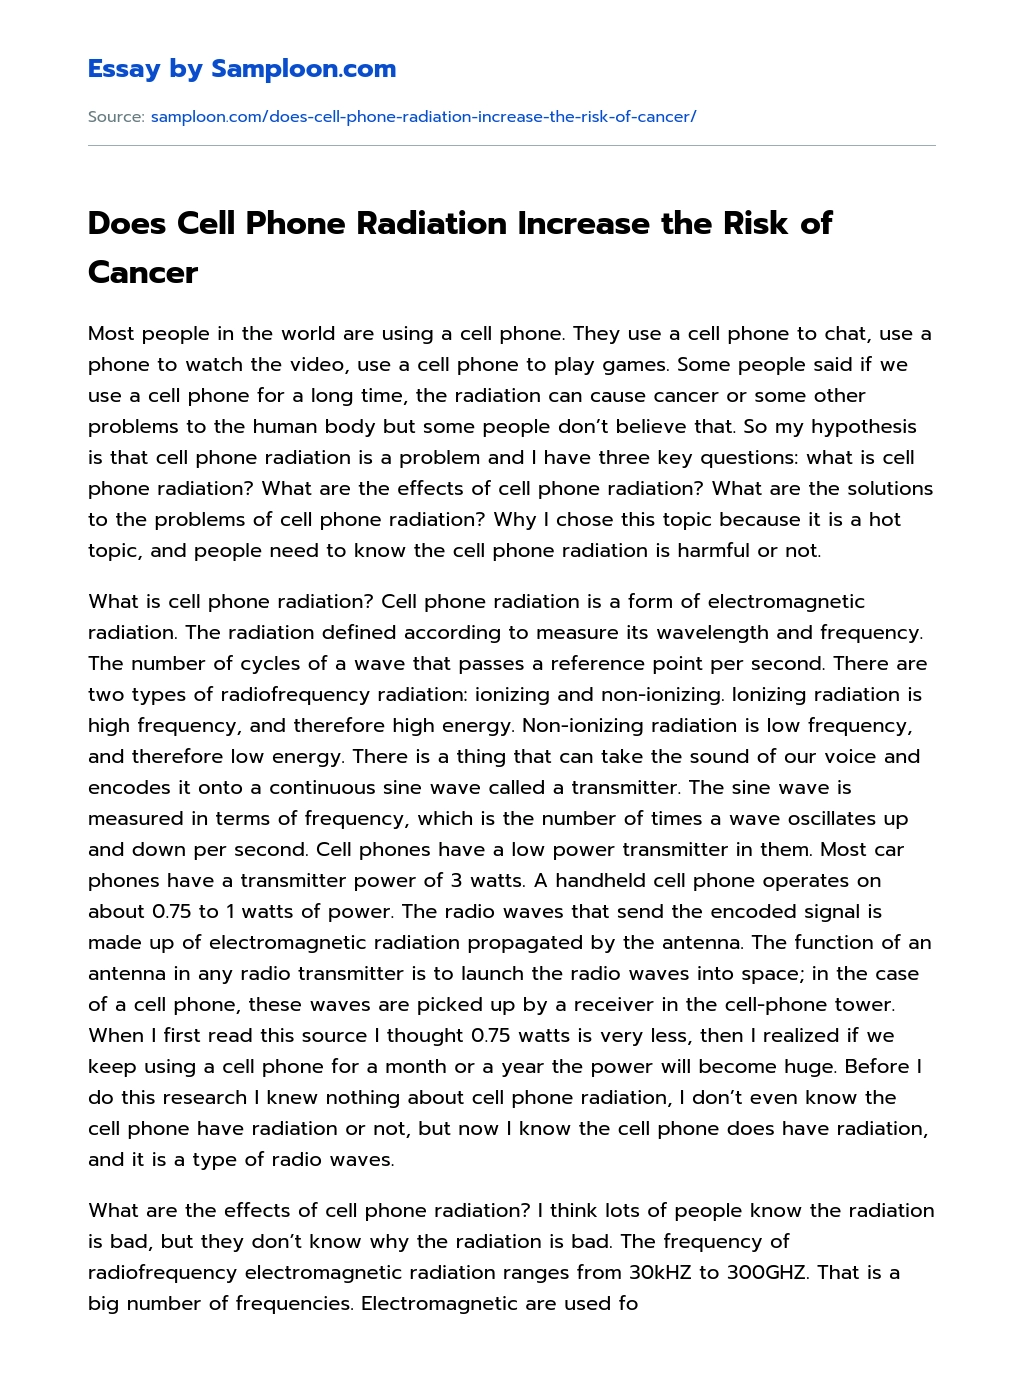 Does Cell Phone Radiation Increase the Risk of Cancer essay